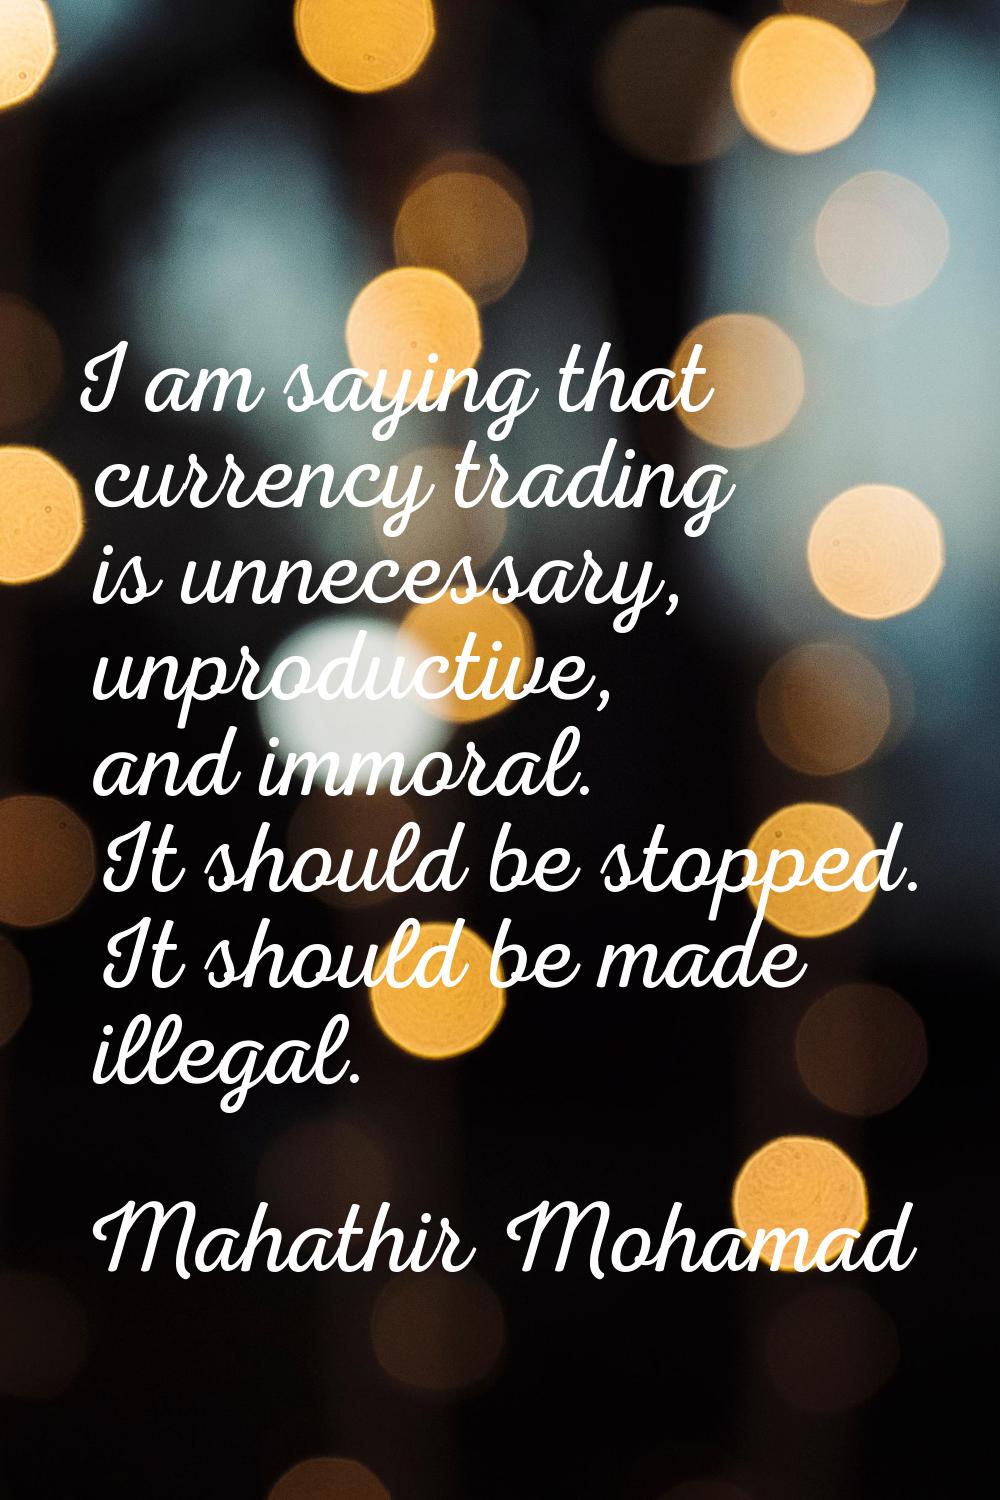 I am saying that currency trading is unnecessary, unproductive, and immoral. It should be stopped. 